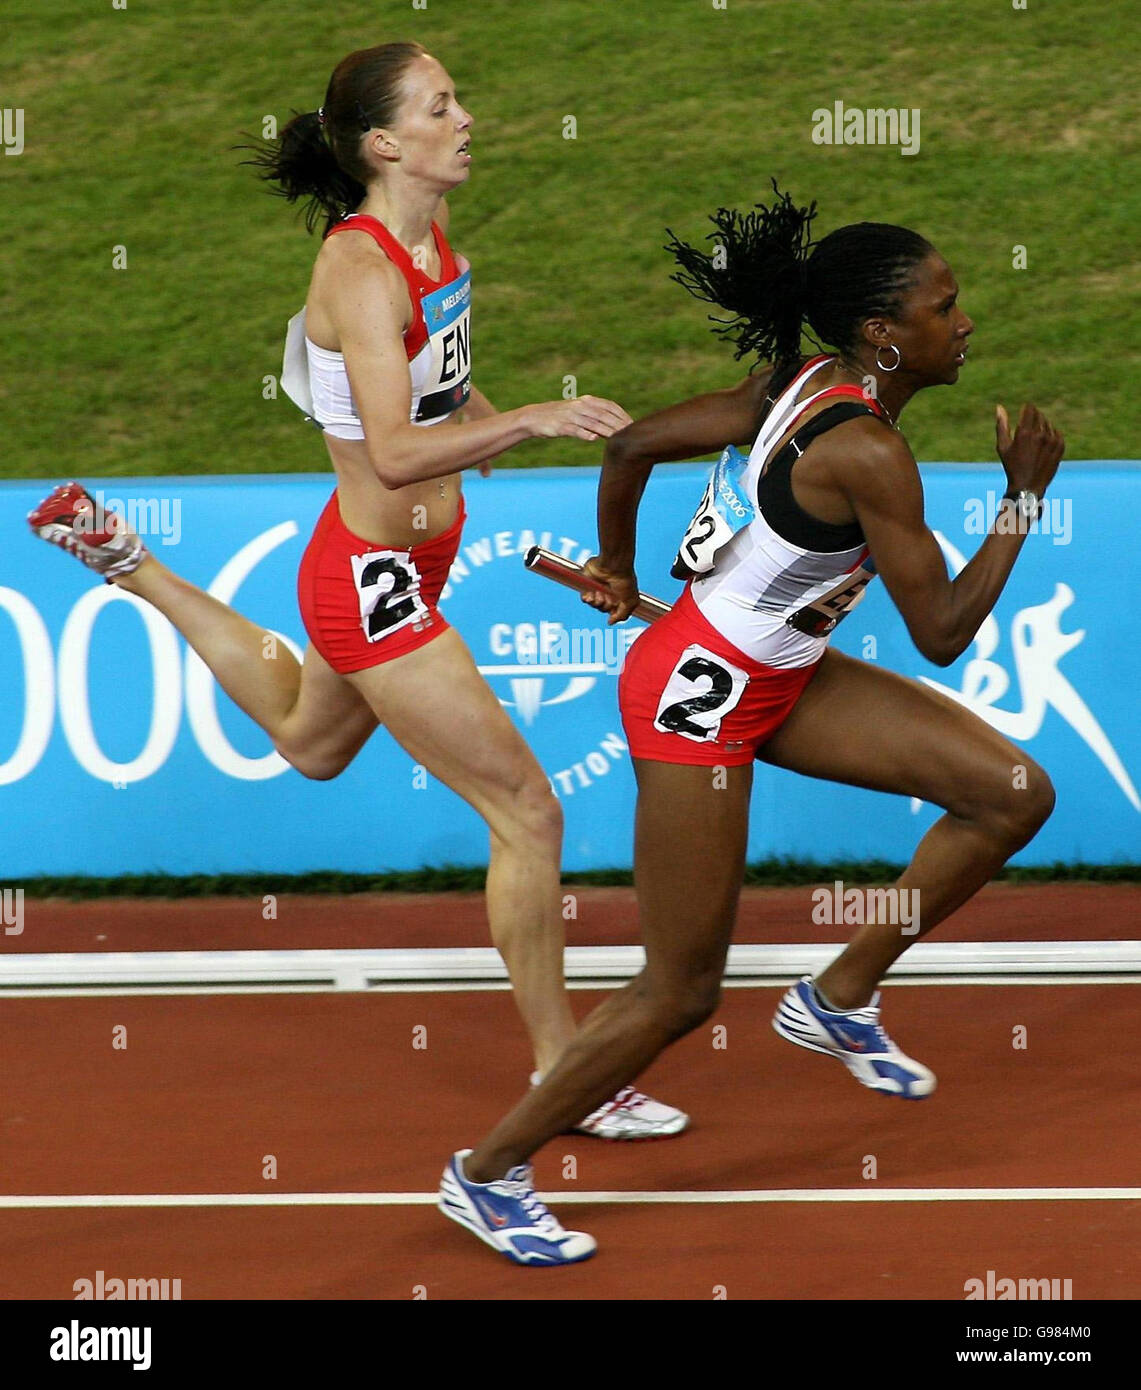 England's Nicola Sanders (L) hands the baton to Natasha Danvers to start the third leg of the Women's 4x400 metres relay final at Melbourne Cricket Ground, during the 18th Commonwealth Games in Melbourne, Australia, Saturday March 25, 2006. England's celebrations were cut short when it was announced they had been disqualified from the event with Danvers-Smith accused of blocking Tamsyn Lewis at the changeover for the third leg. PRESS ASSOCIATION Photo. Photo credit should read: Gareth Copley/PA. Stock Photo